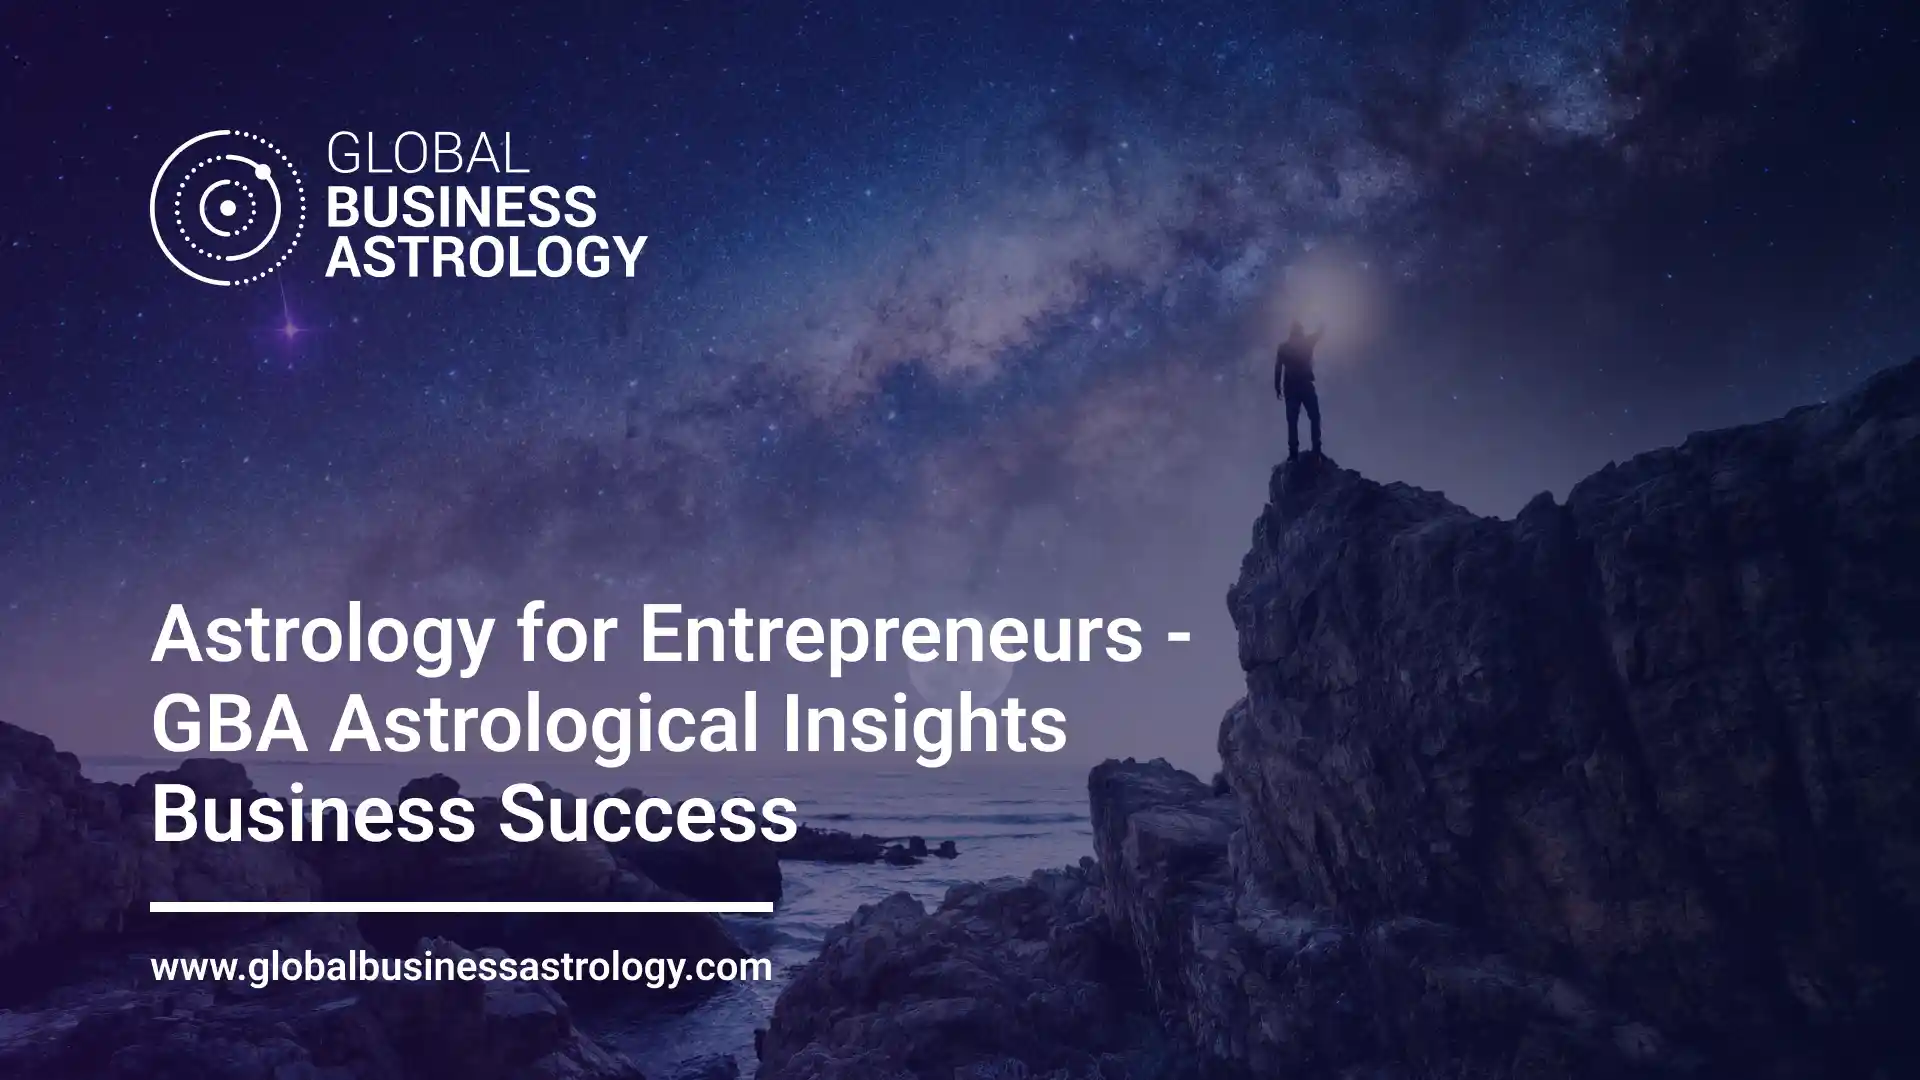 Discover how Global Business Astrology for Entrepreneurs insights empower entrepreneurs on their path to success.